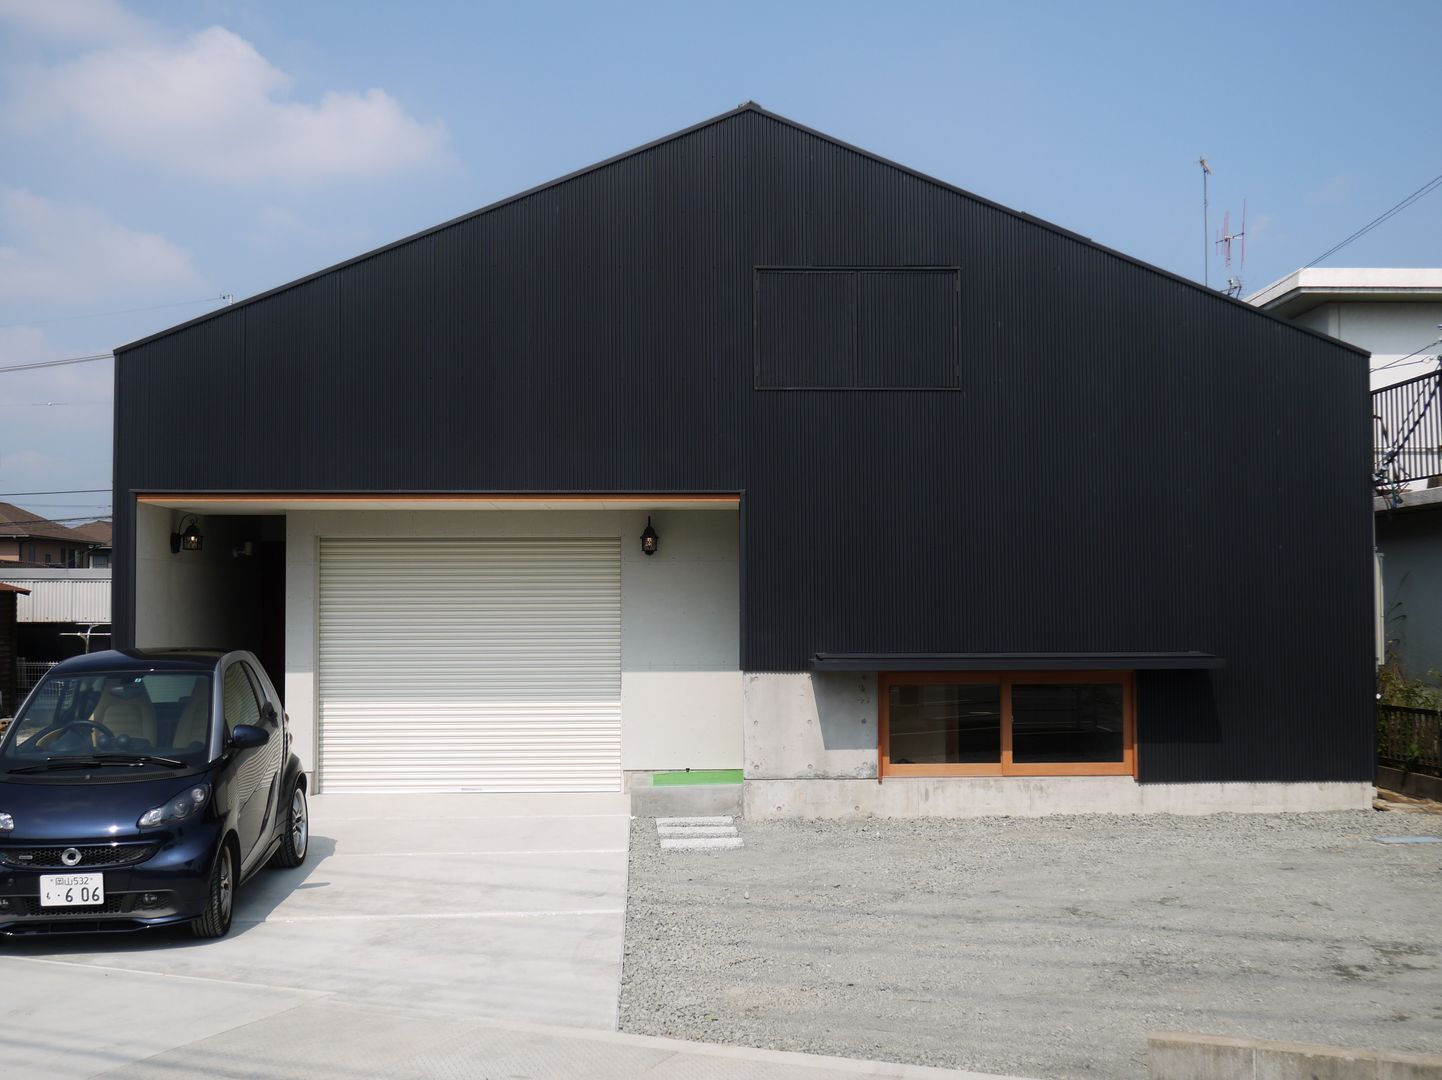 Ａ’ｇｒｅａｔの家, 風景のある家.LLC 風景のある家.LLC Casas industriais Prata/Ouro